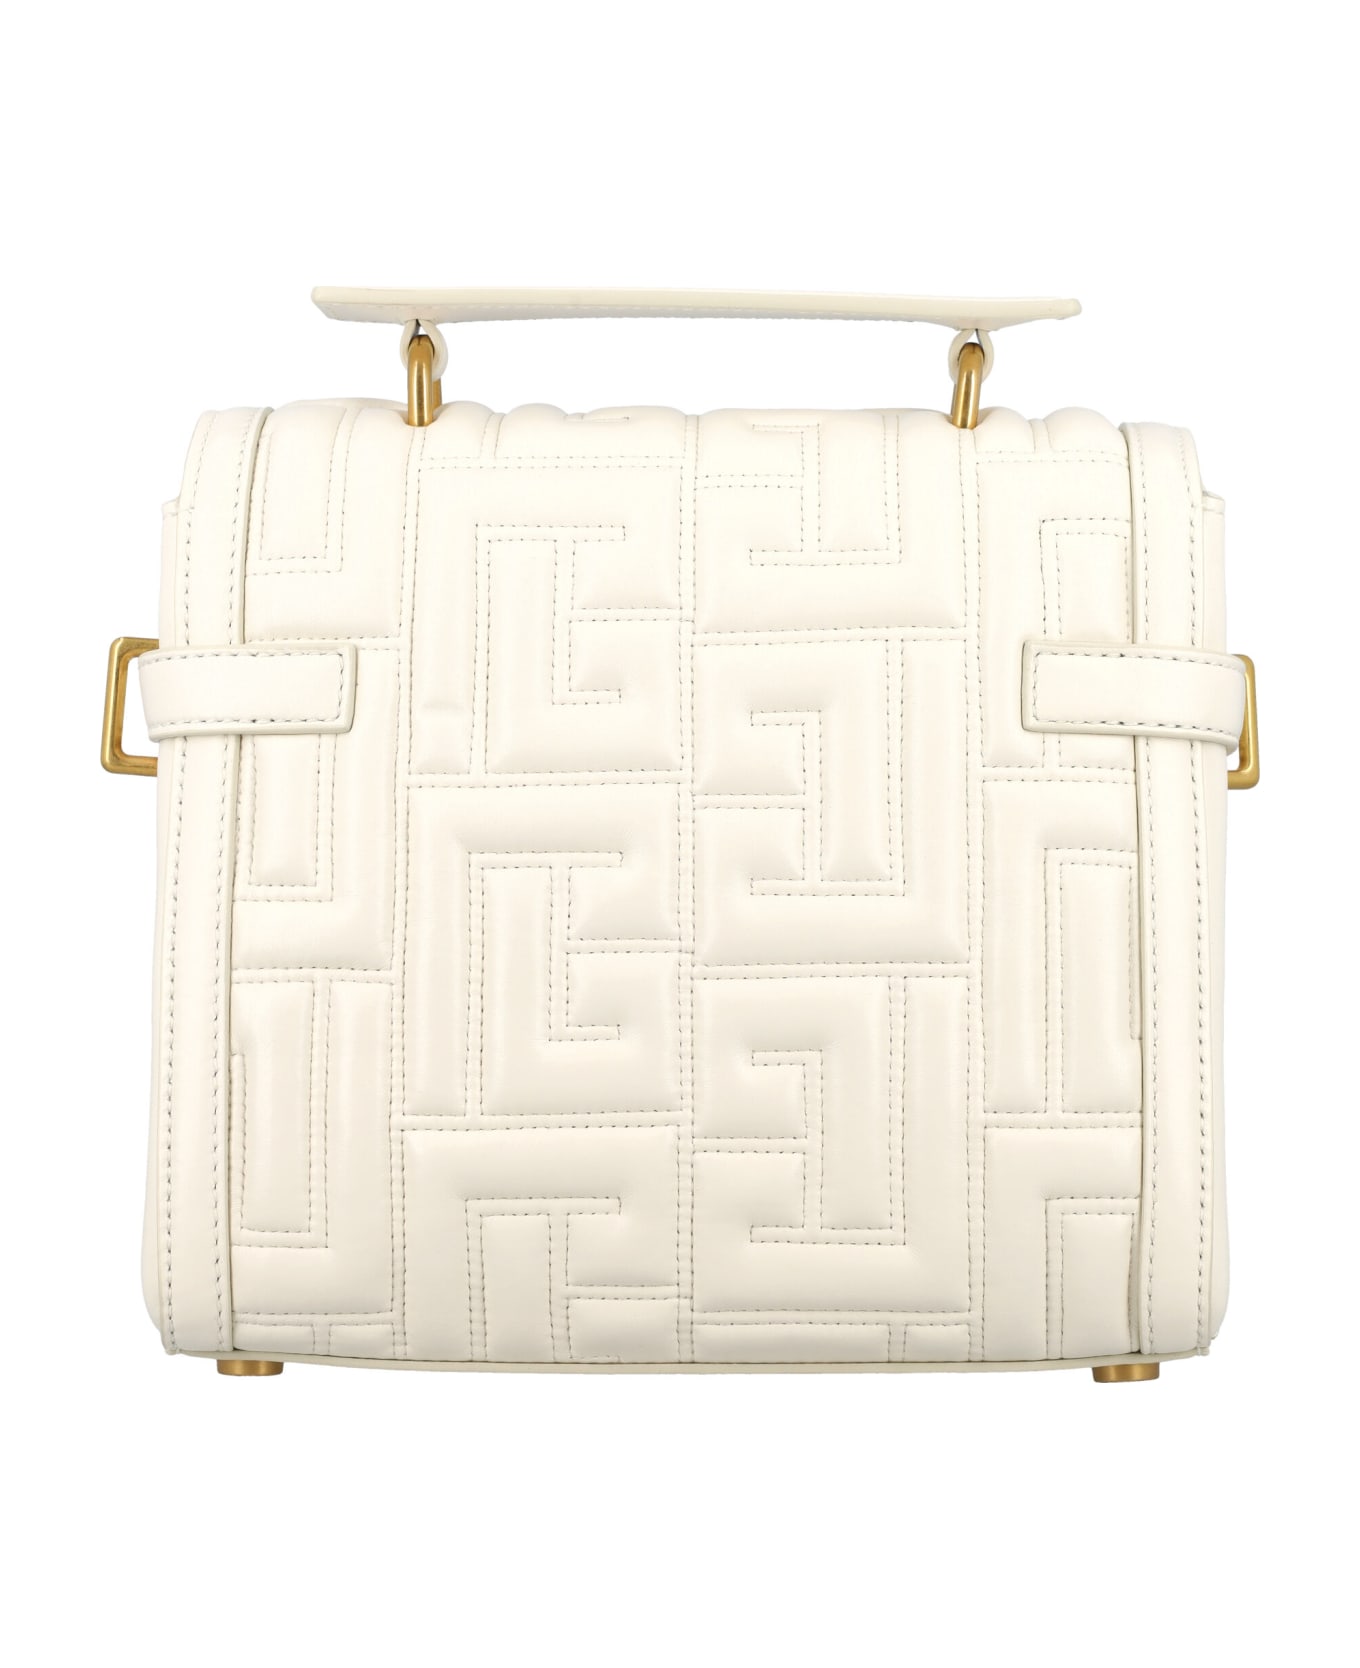 Balmain B-buzz 23 Quilted Leather Bag - WHITE